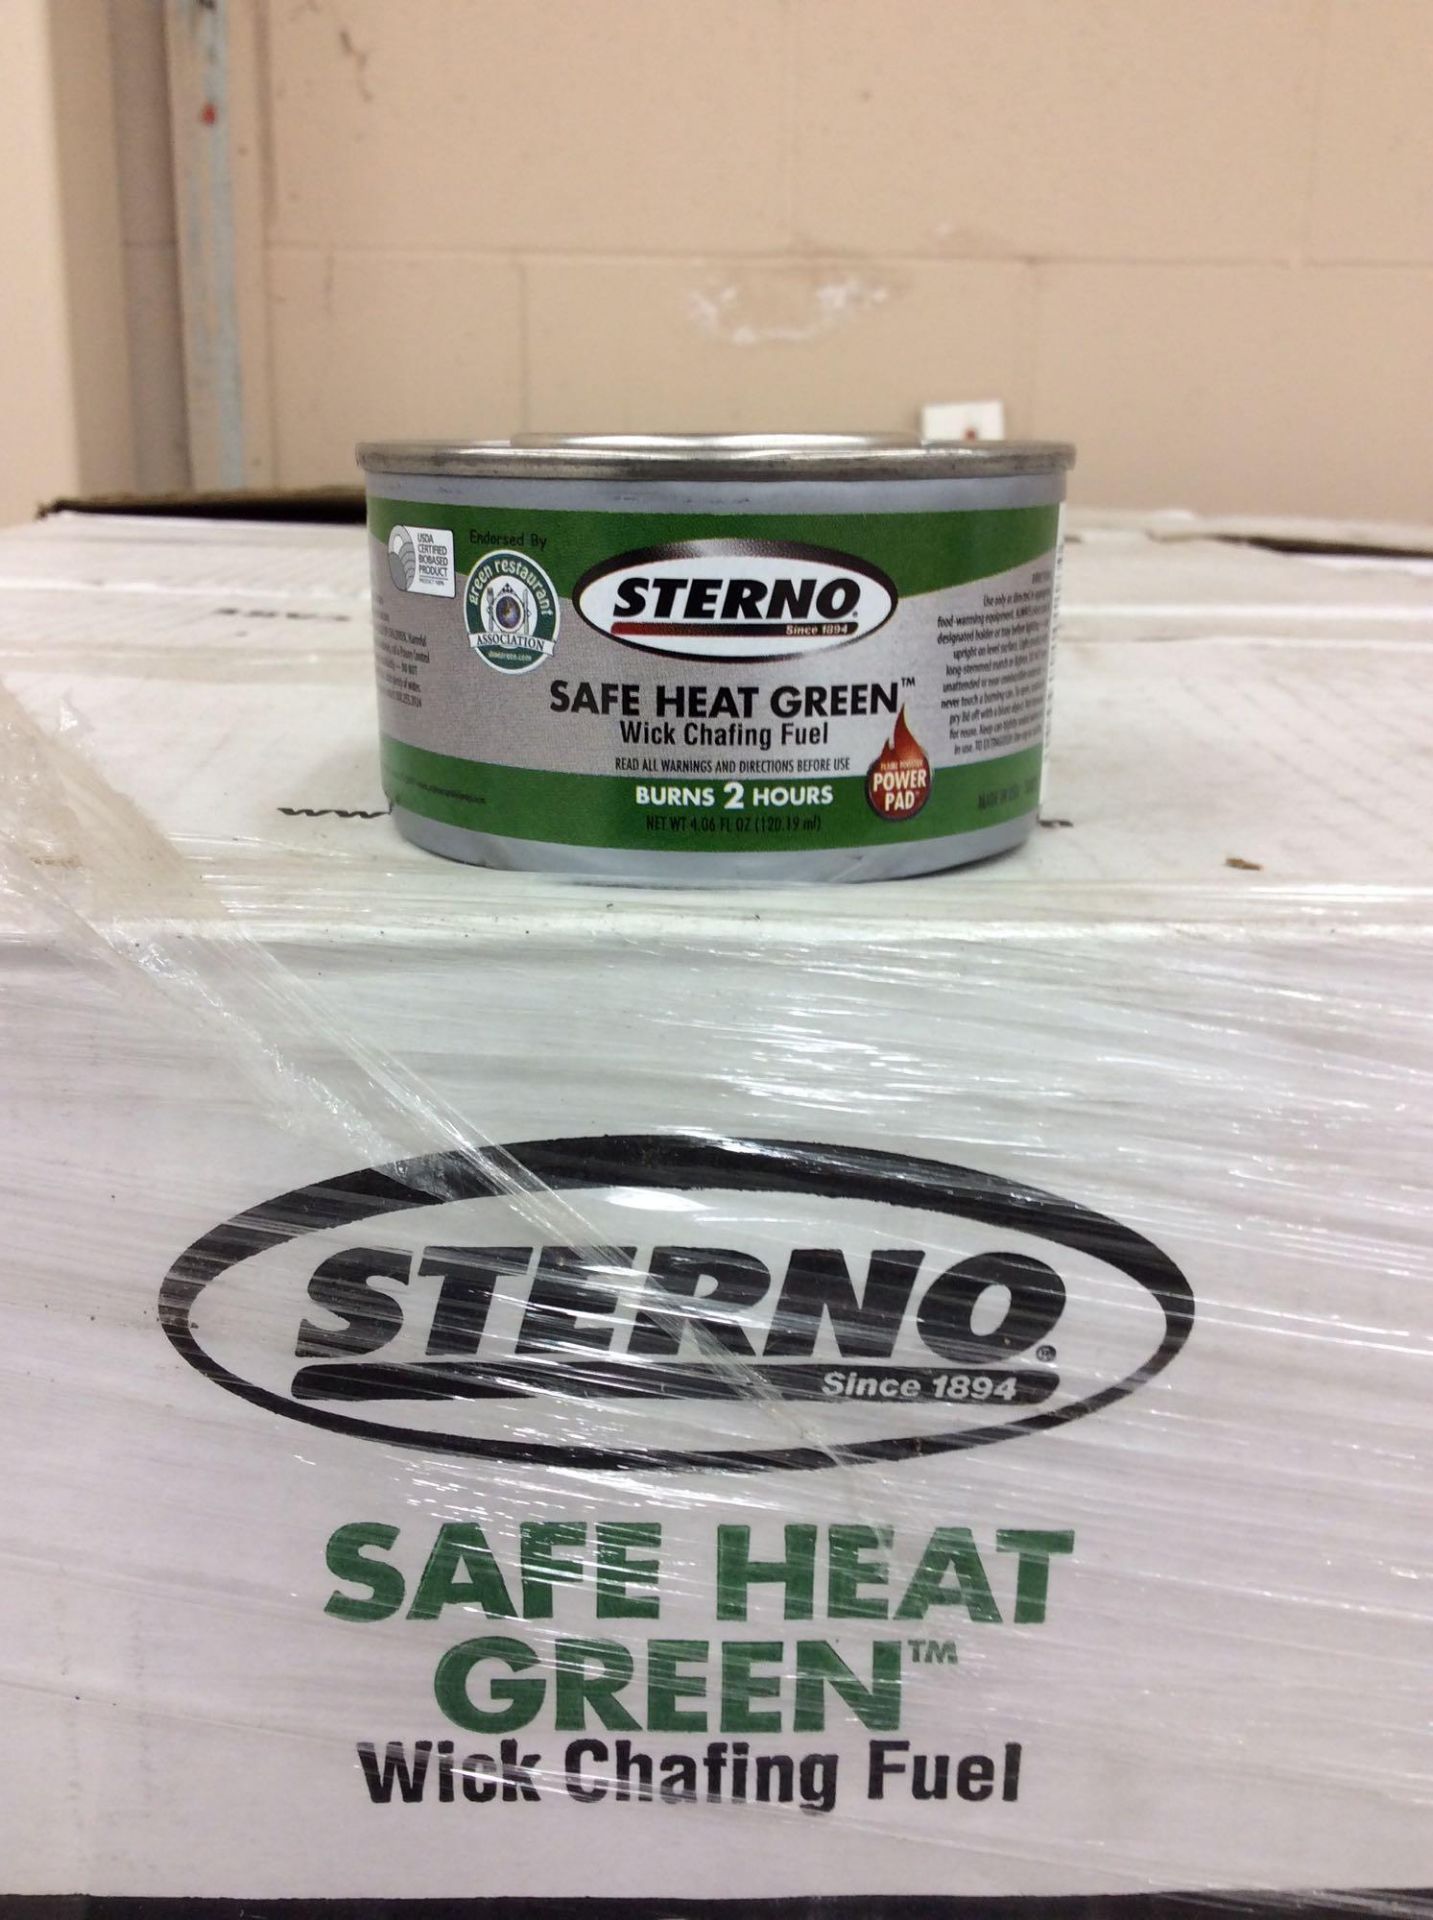 Lot of (28) cases of Sterno Safe Heat Green Wick Chafing Fuel, 2-hr, 4.06-oz, (72) cans per case